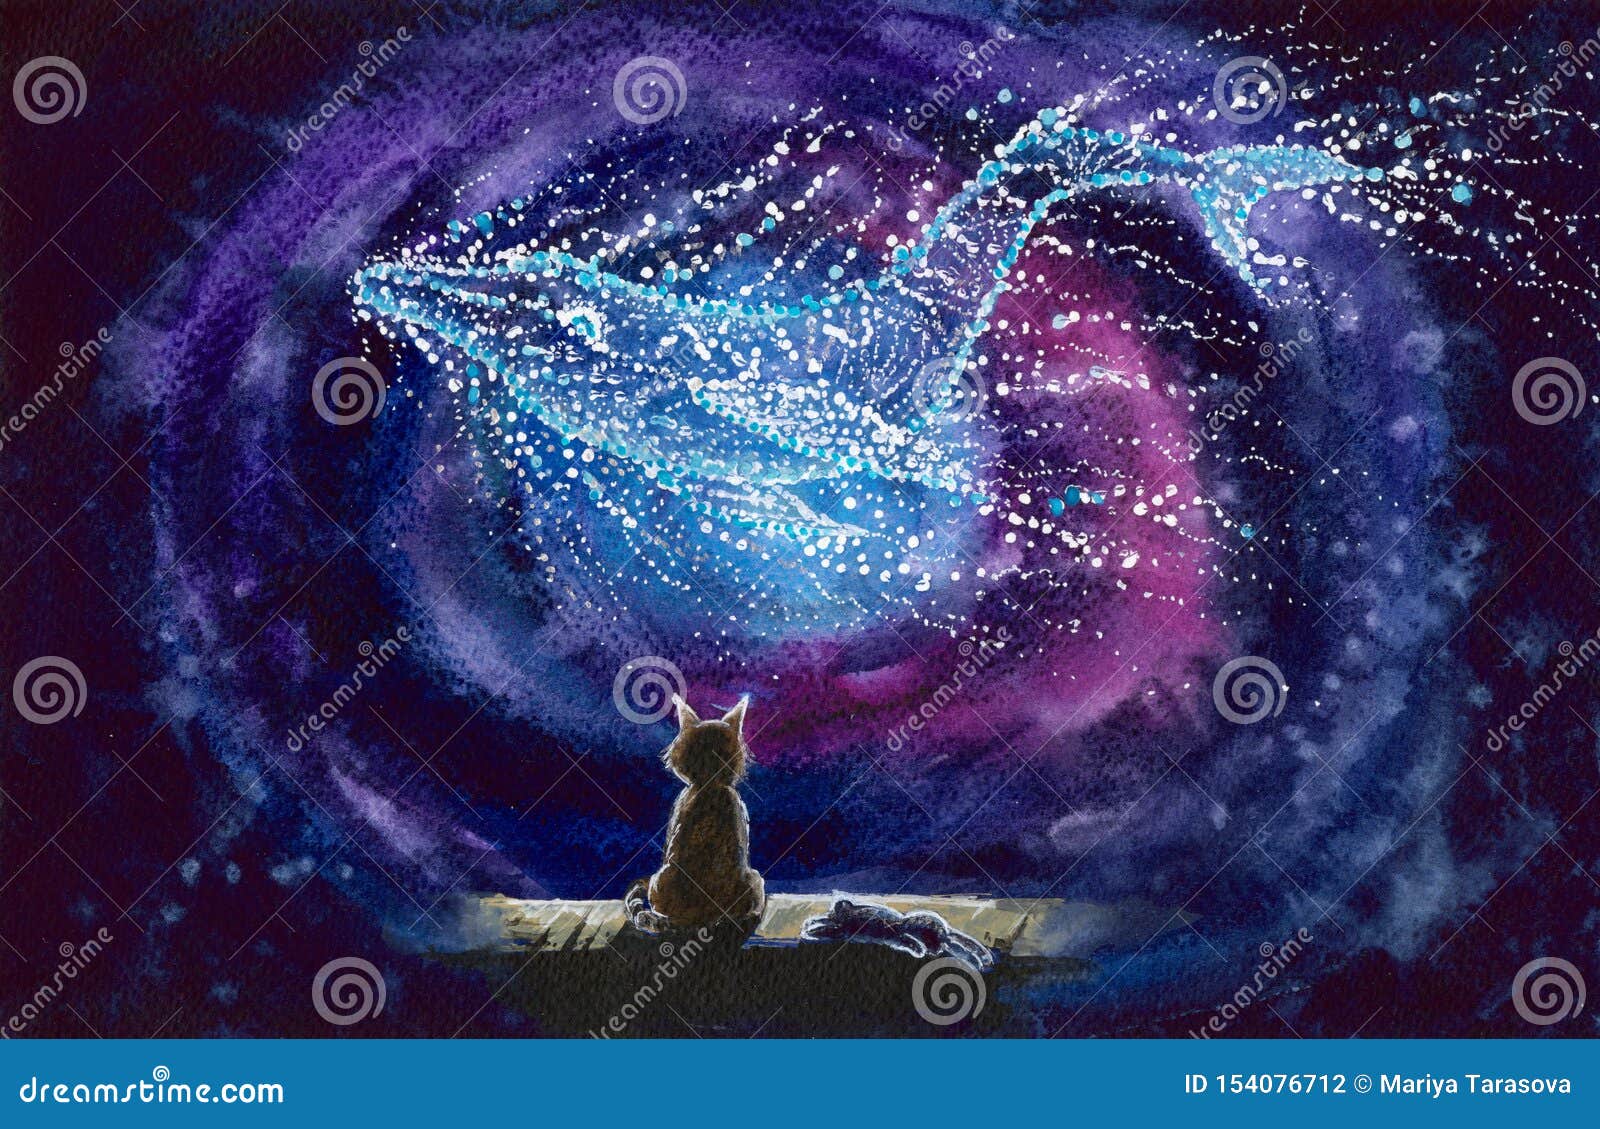 watercolor cat with starry whale constellation